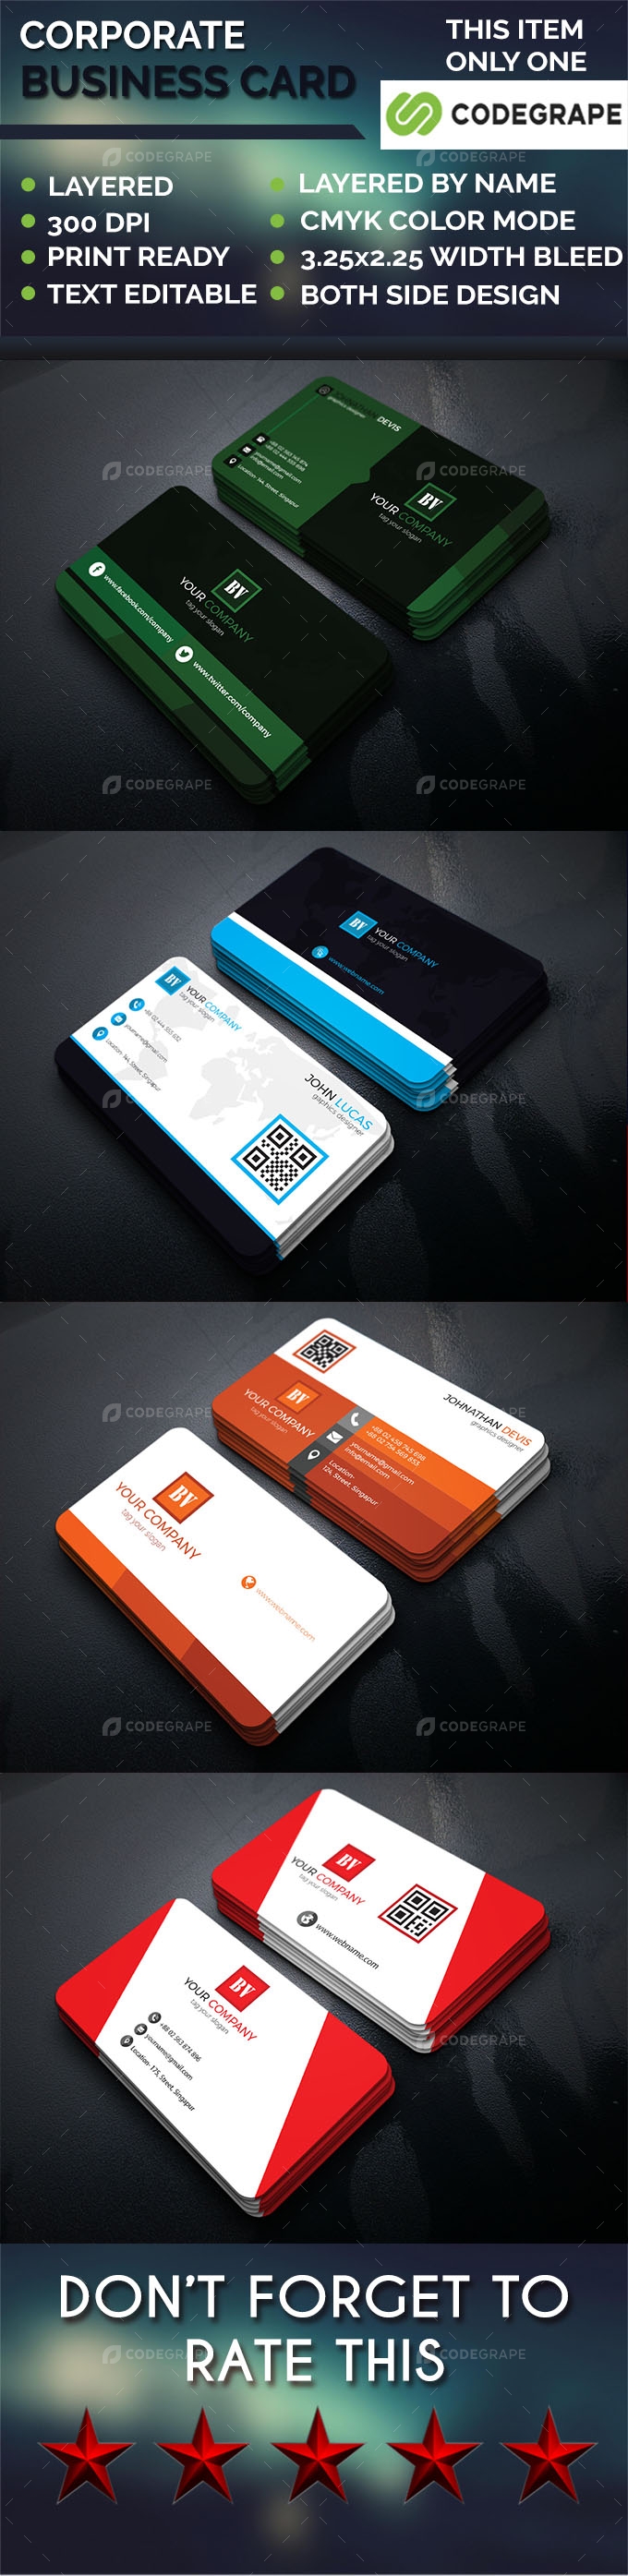 Corporate Business Card 4 in 1